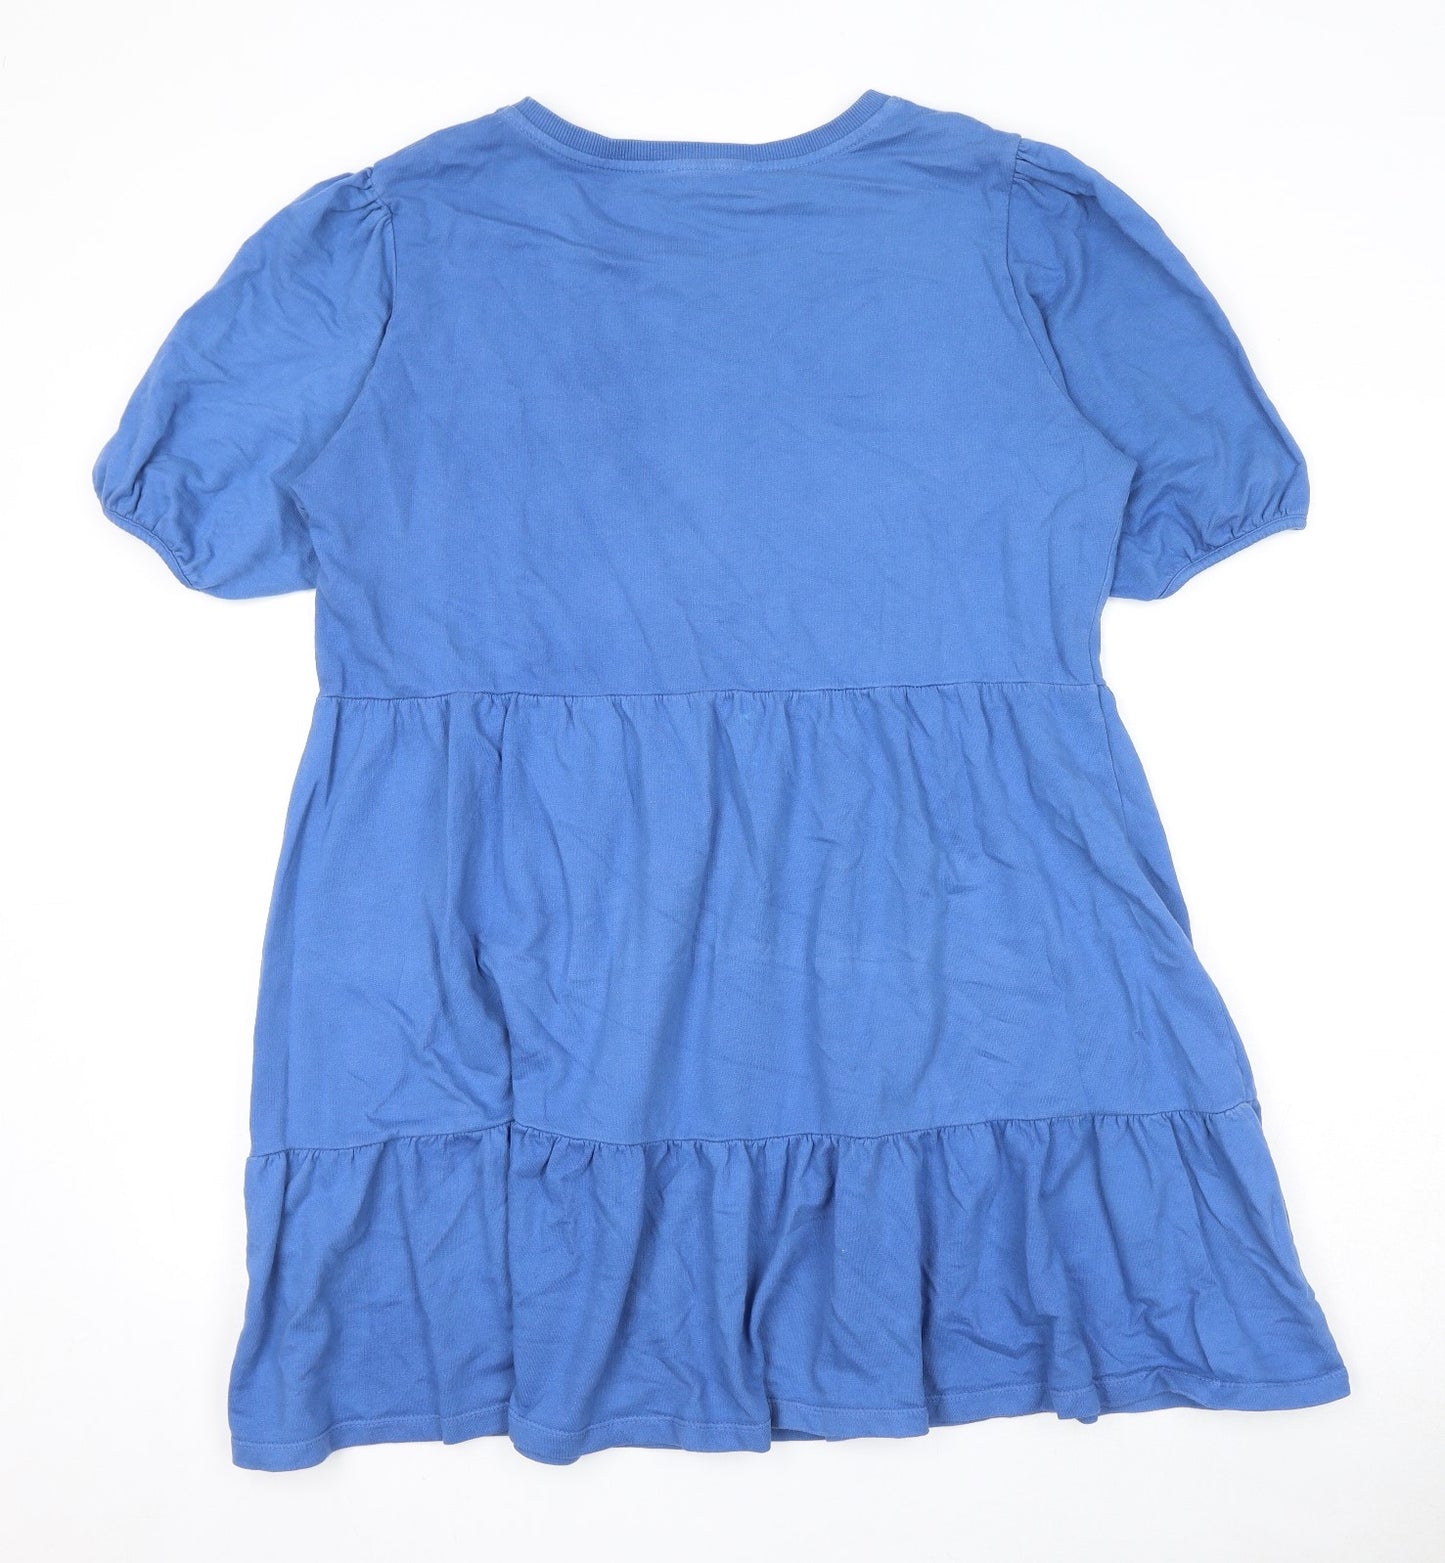 New Look Womens Blue Cotton T-Shirt Dress Size 18 Roll Neck Pullover